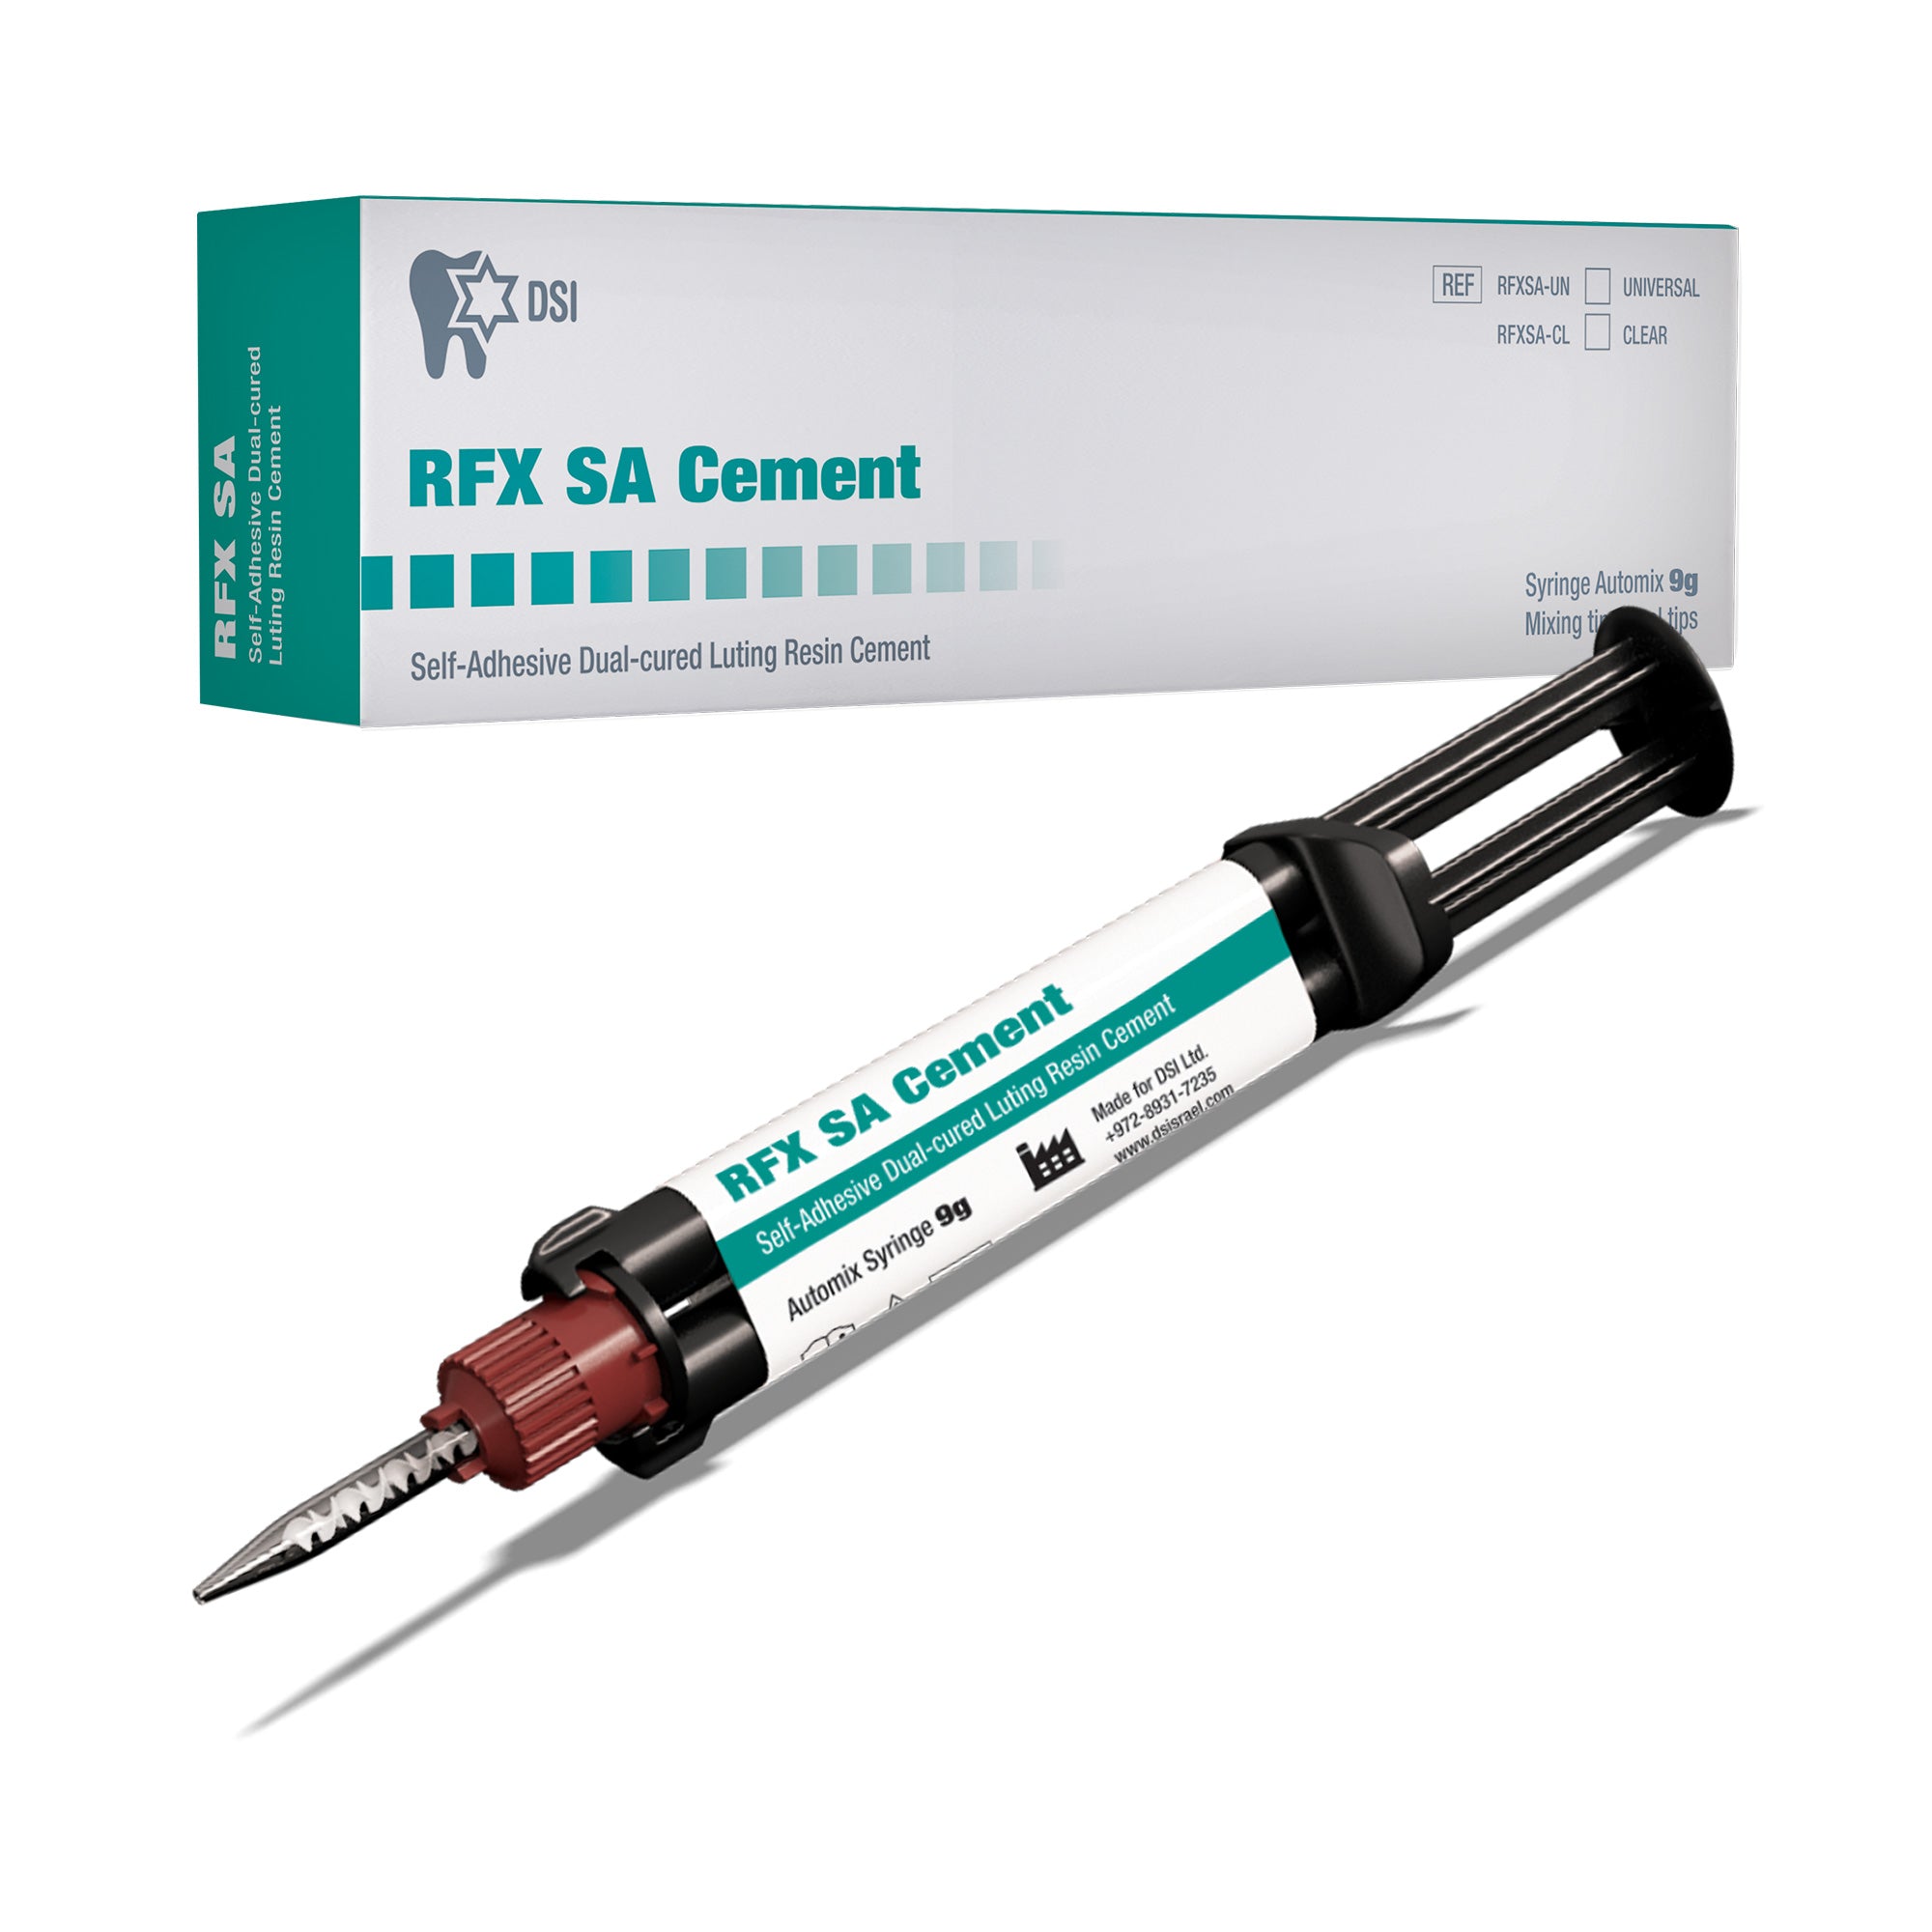 DSI RFX SA Dual-Cure Self-Adhesive Resin Cement For Crowns 9g